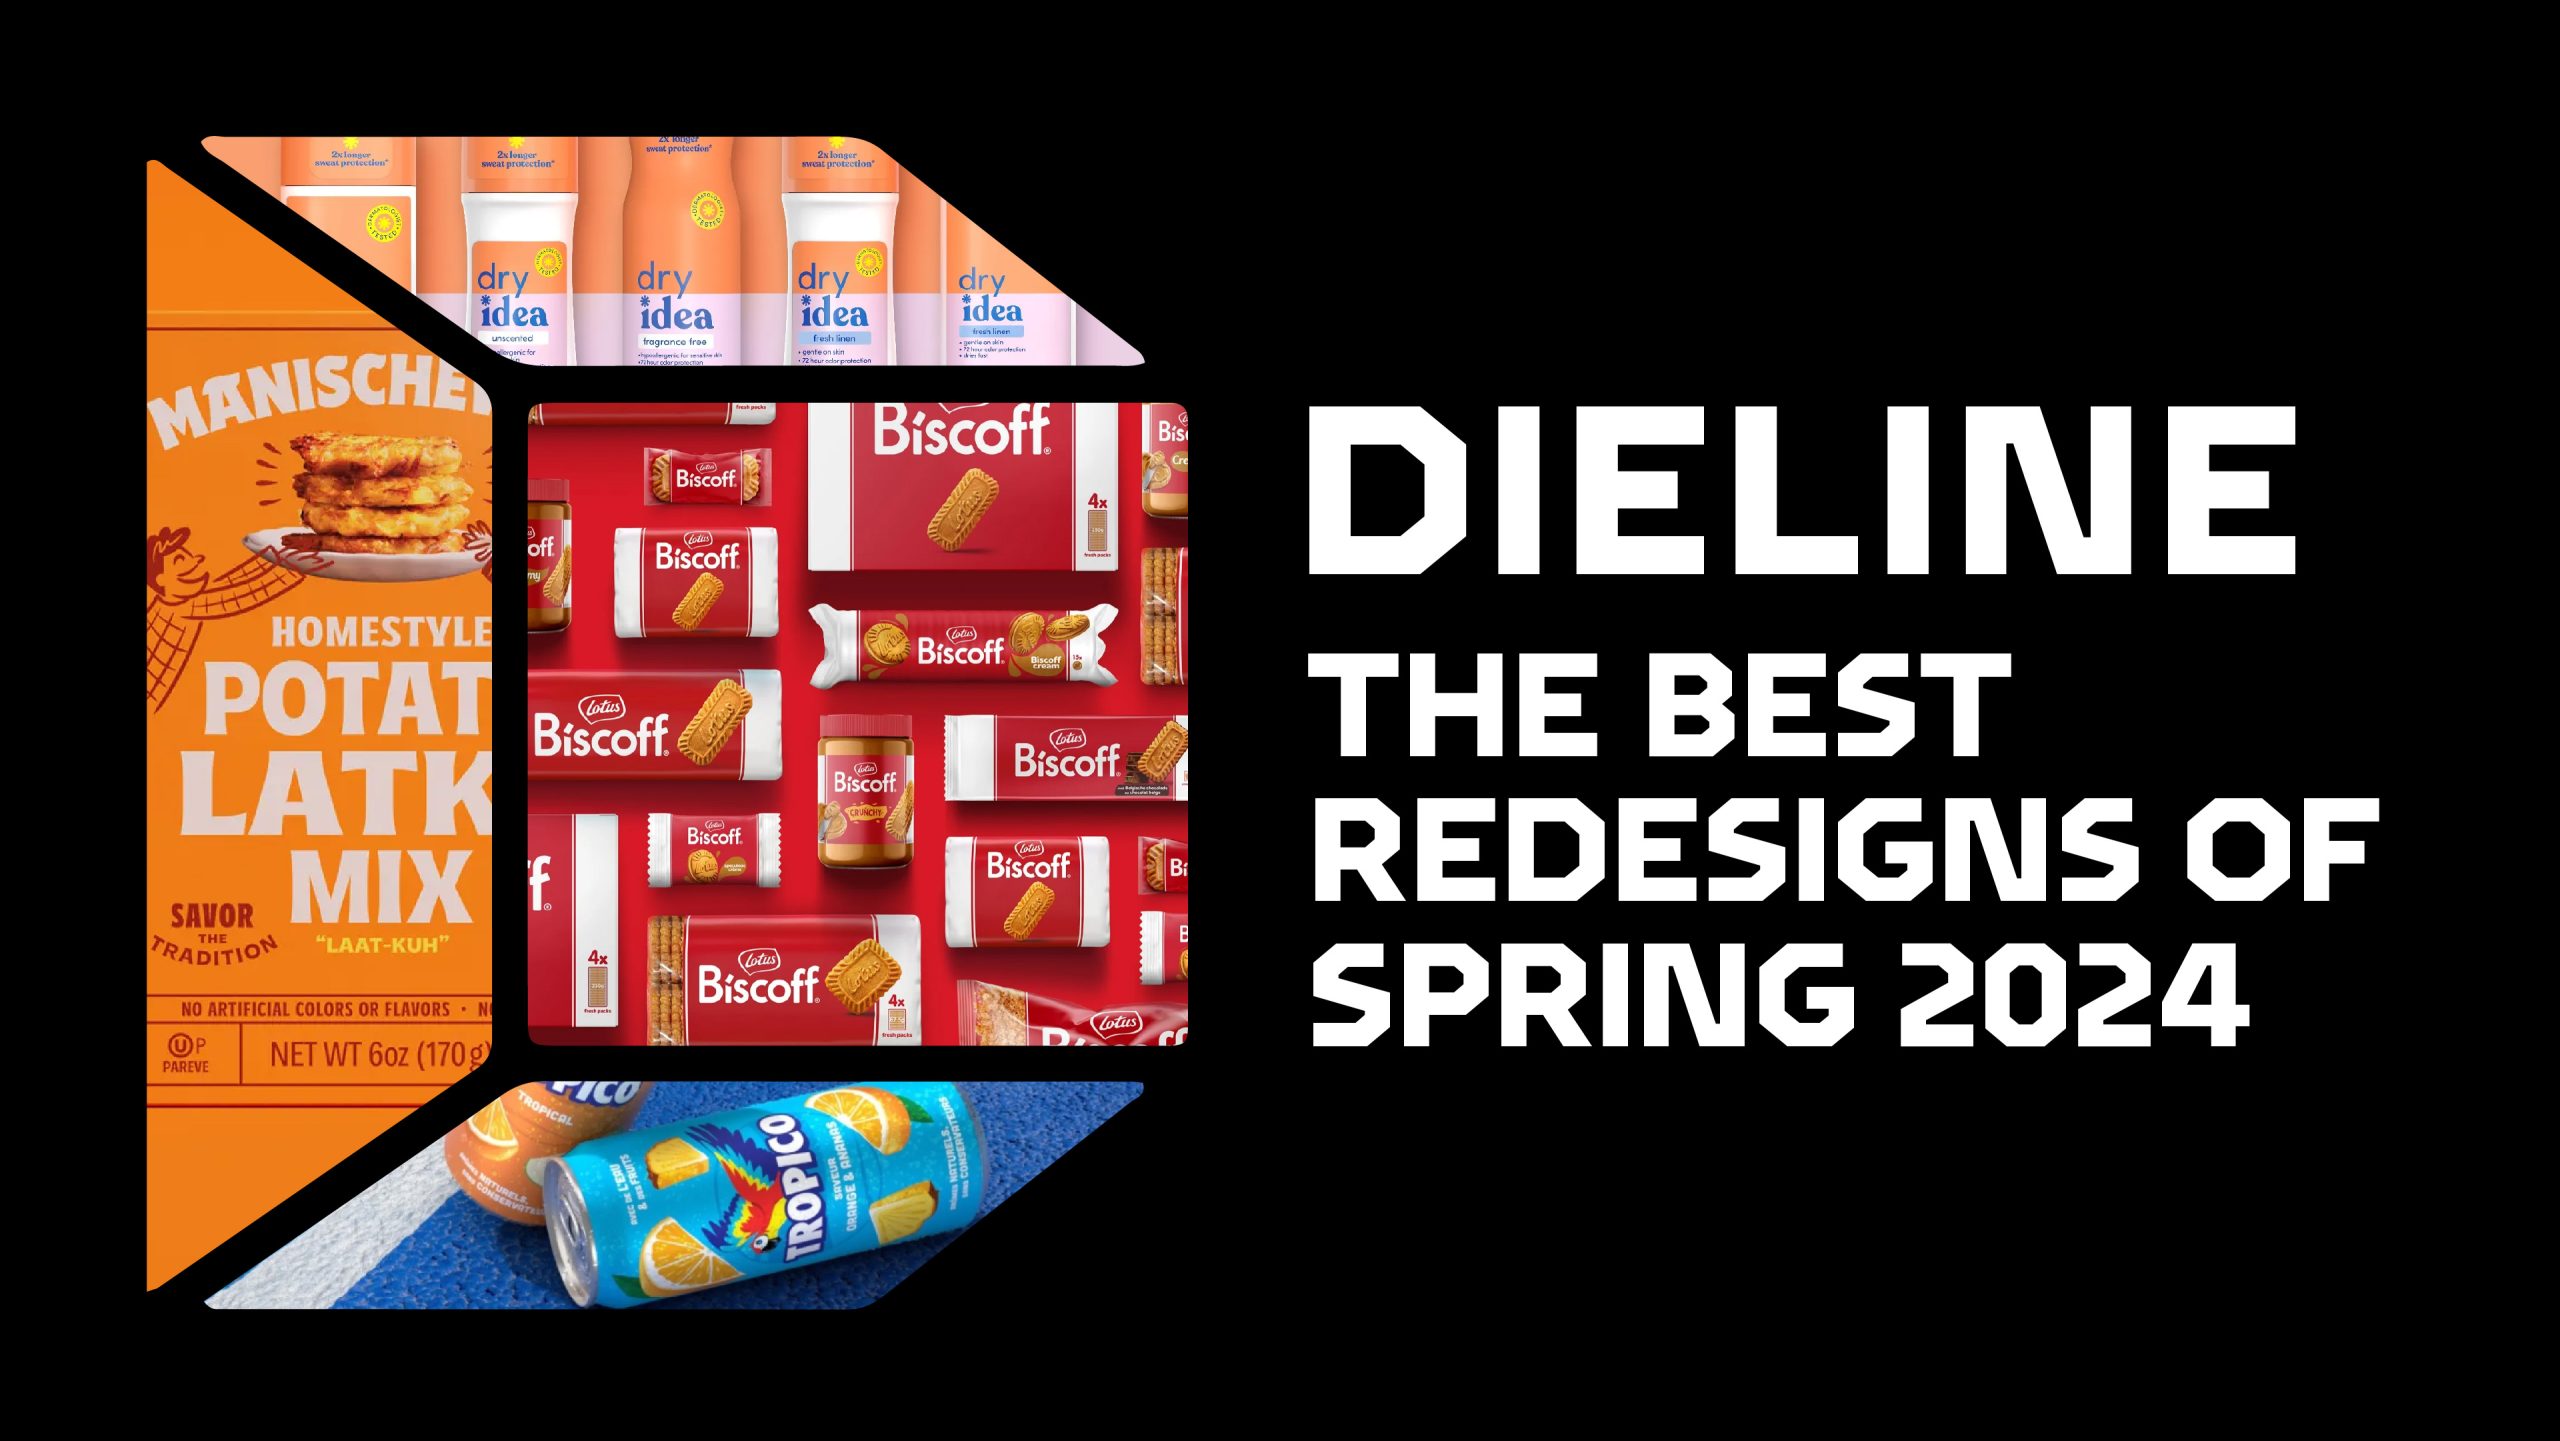 The Best Redesigns of Spring 2024